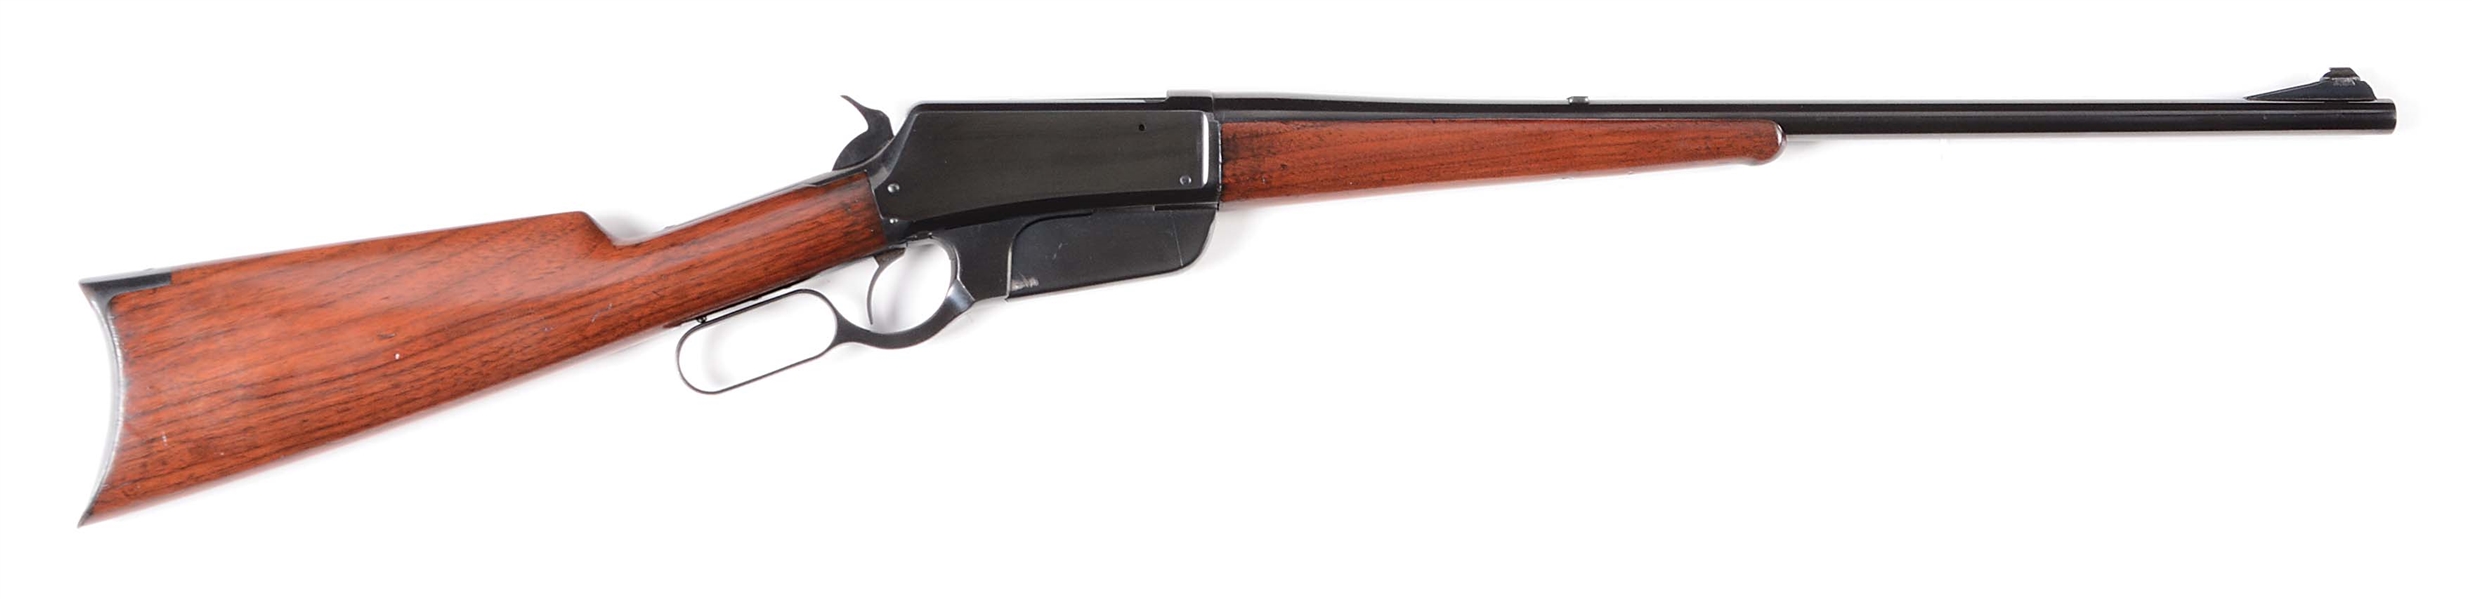 (A) WINCHESTER MODEL 1895 FLATSIDE LEVER ACTION RIFLE (1896).